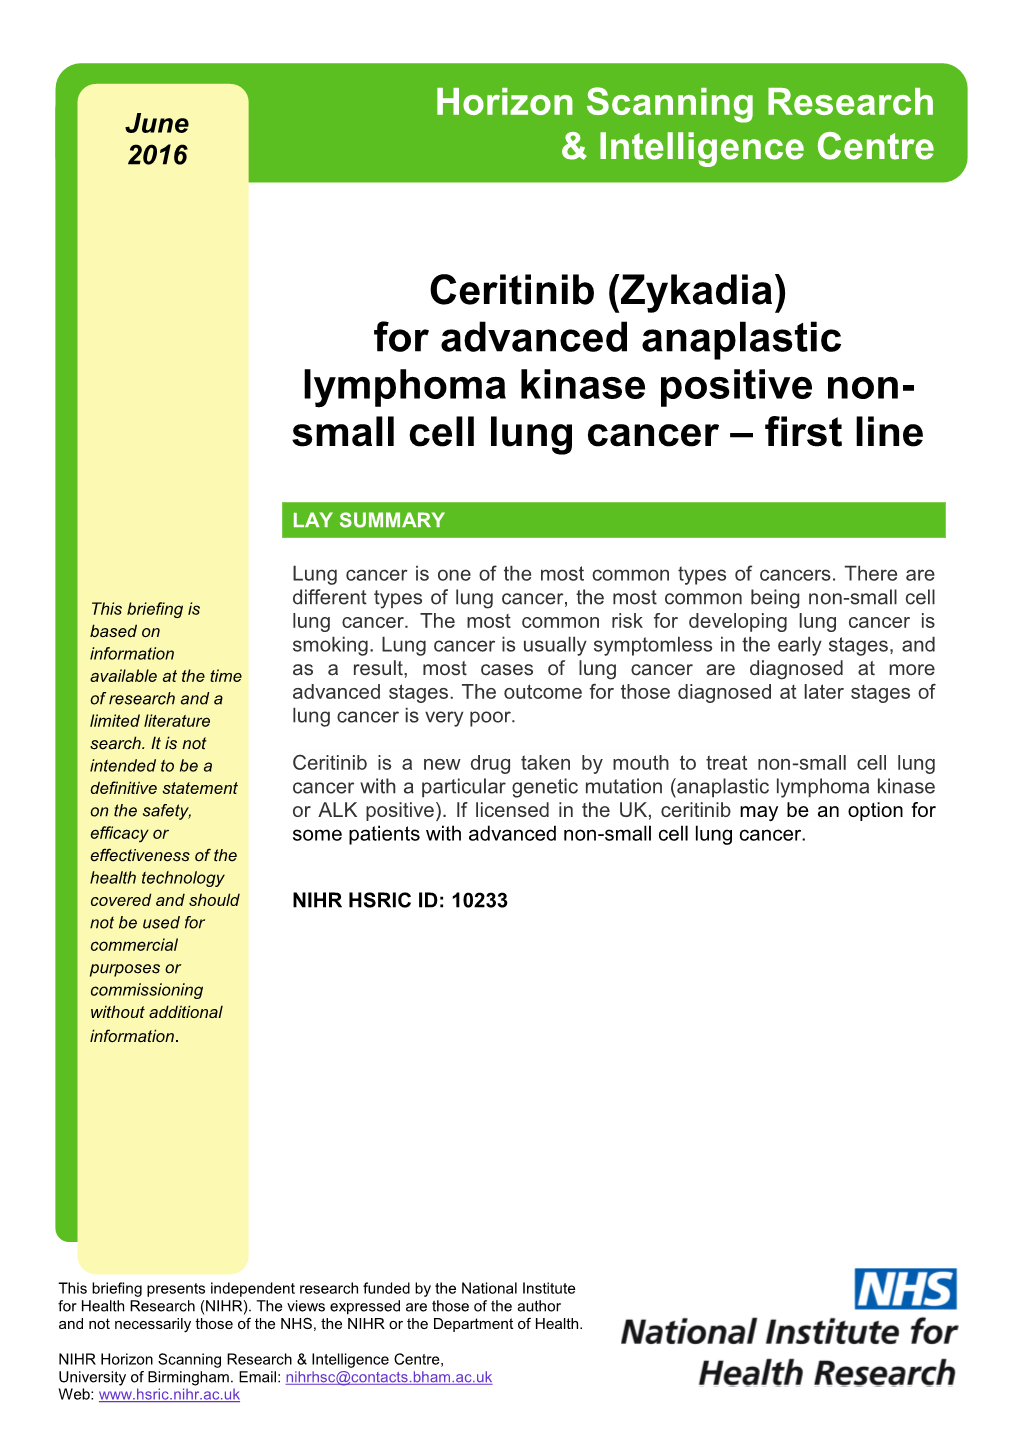 For Advanced Anaplastic Lymphoma Kinase Positive Non- Small Cell Lung Cancer – First Line